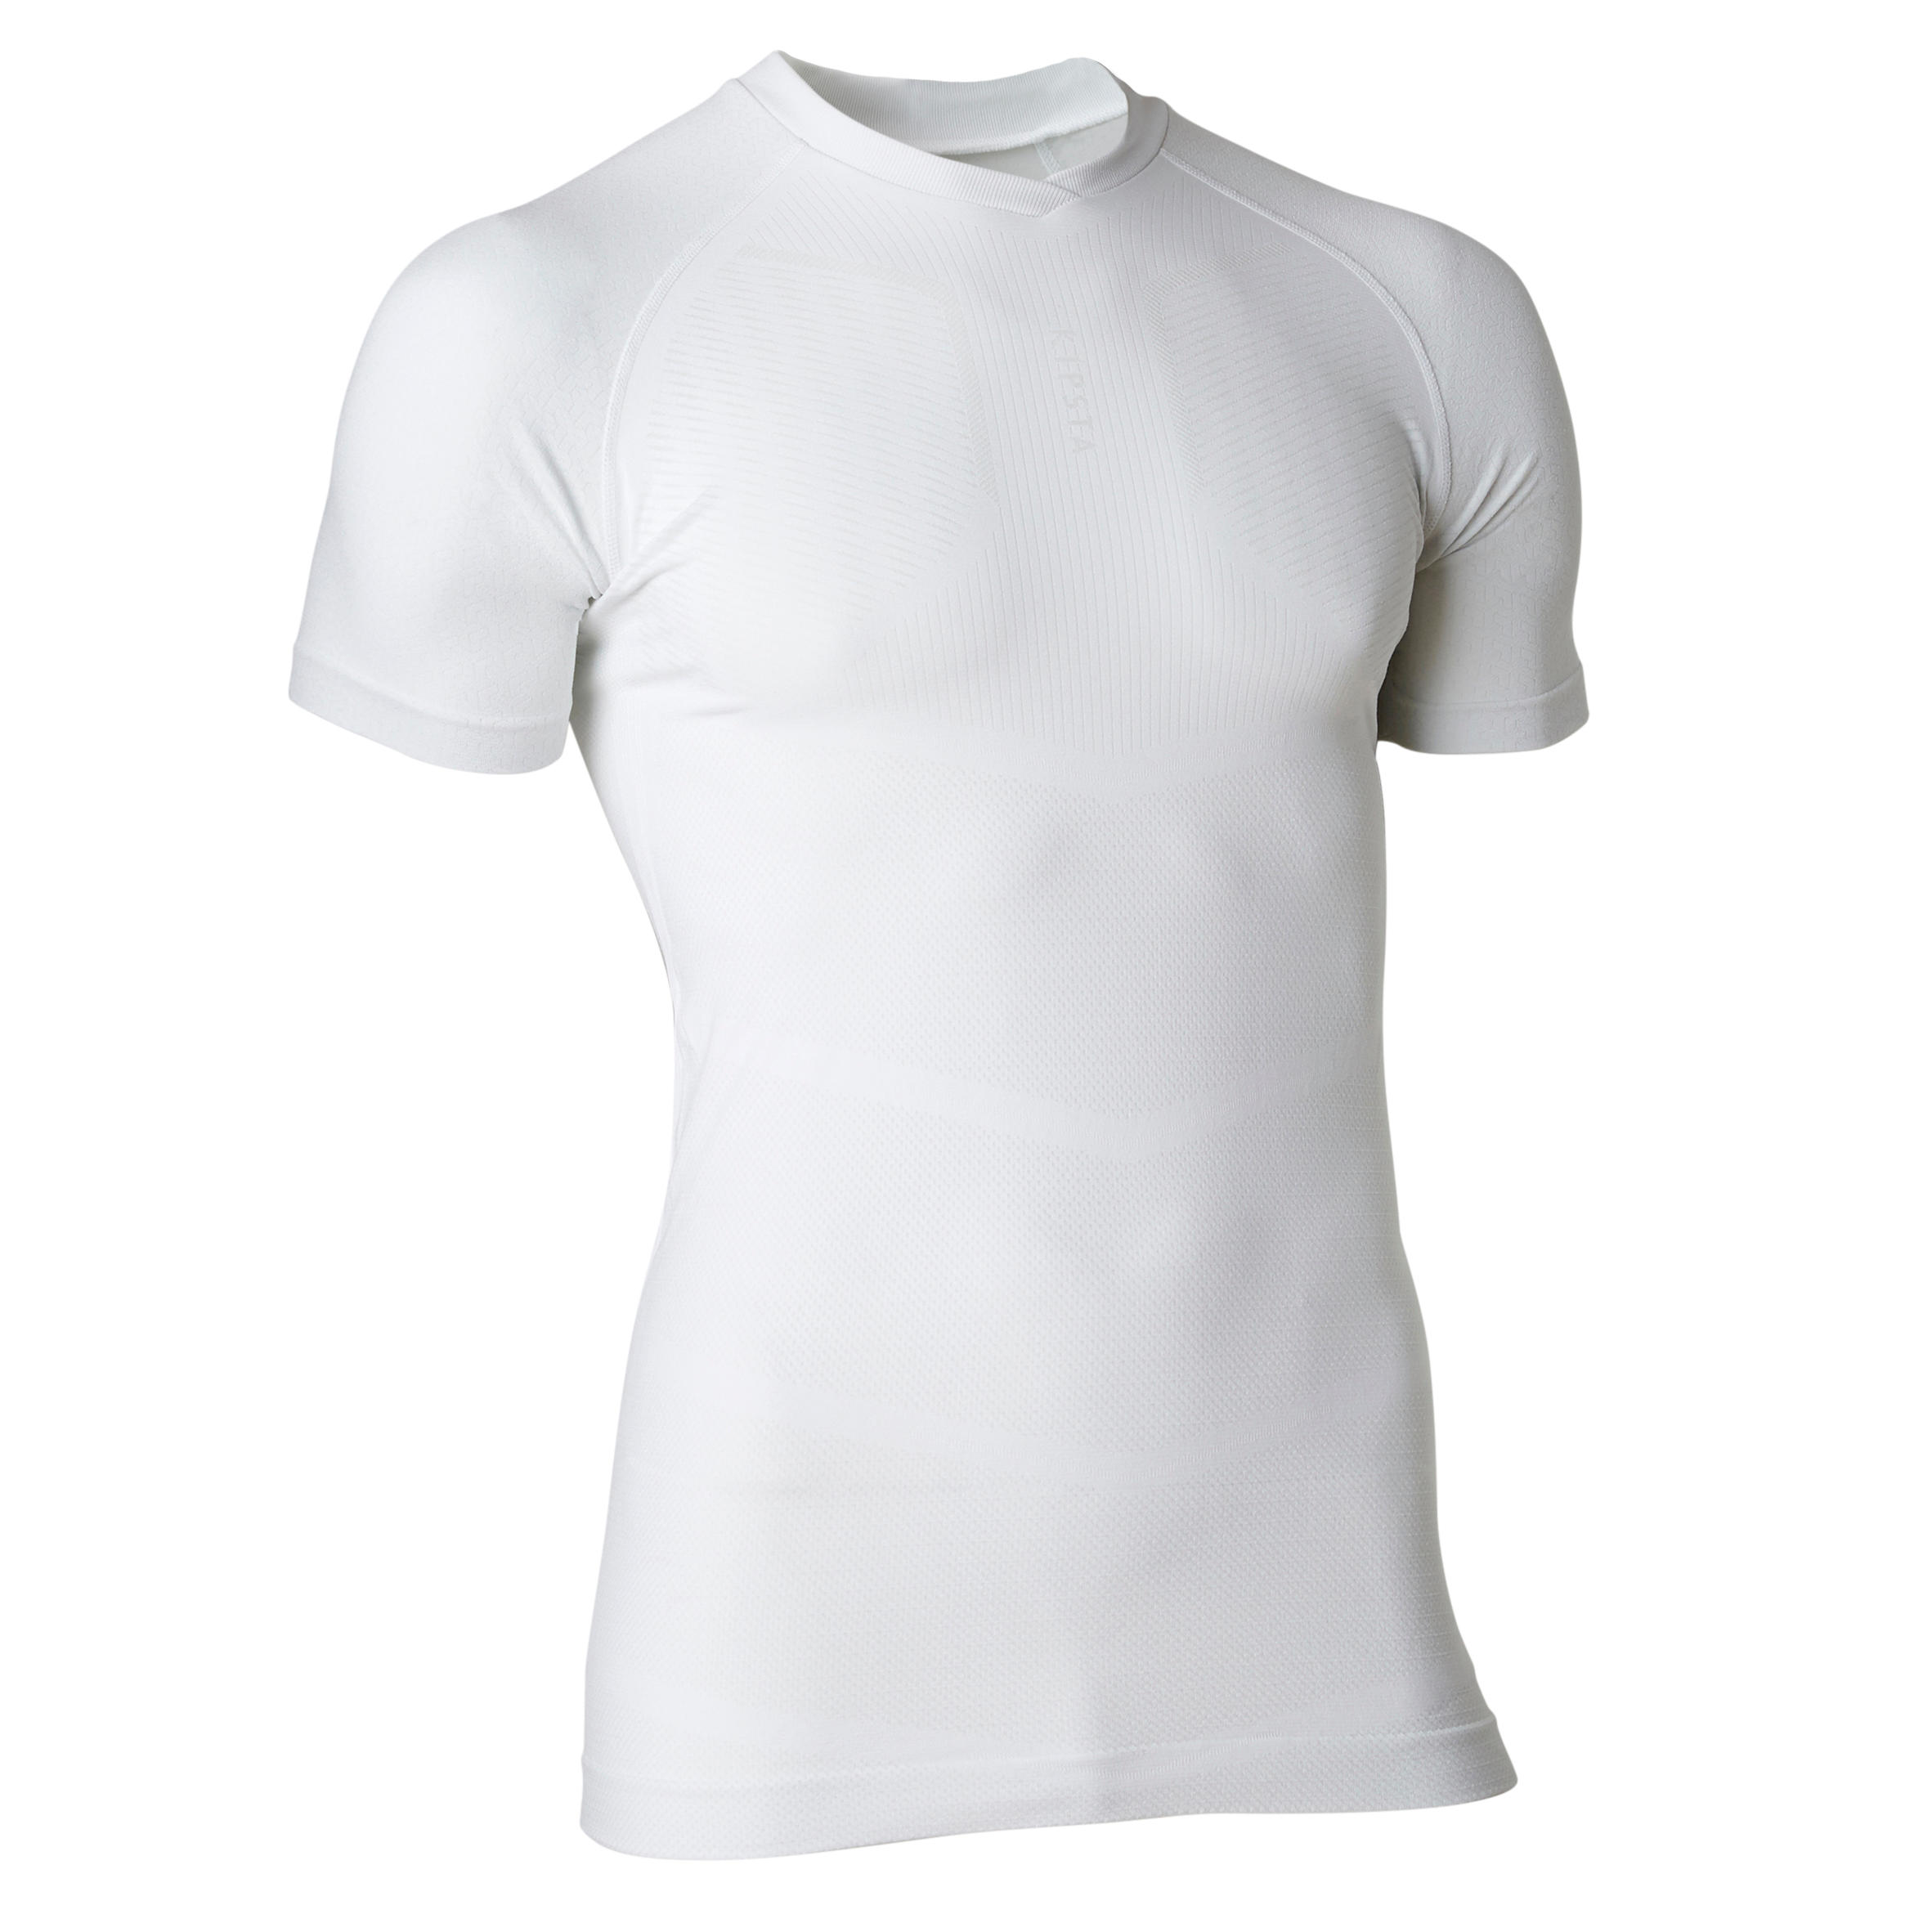 Adult Short-Sleeved Thermal Base Layer Top Keepdry 500 - White 1/7